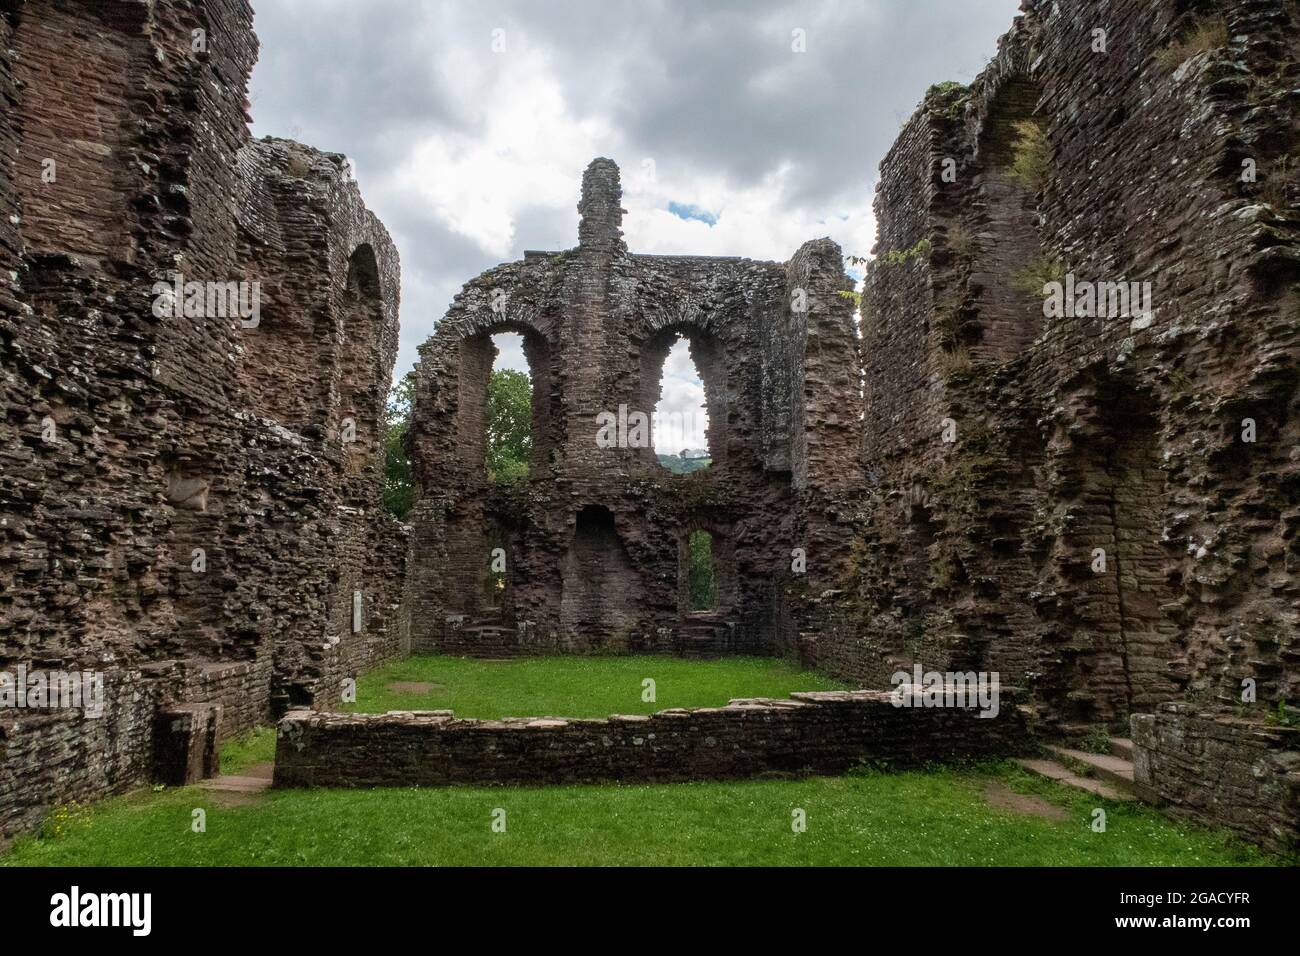 Grosmont Castle, Monmouthshire Wales Stockfoto